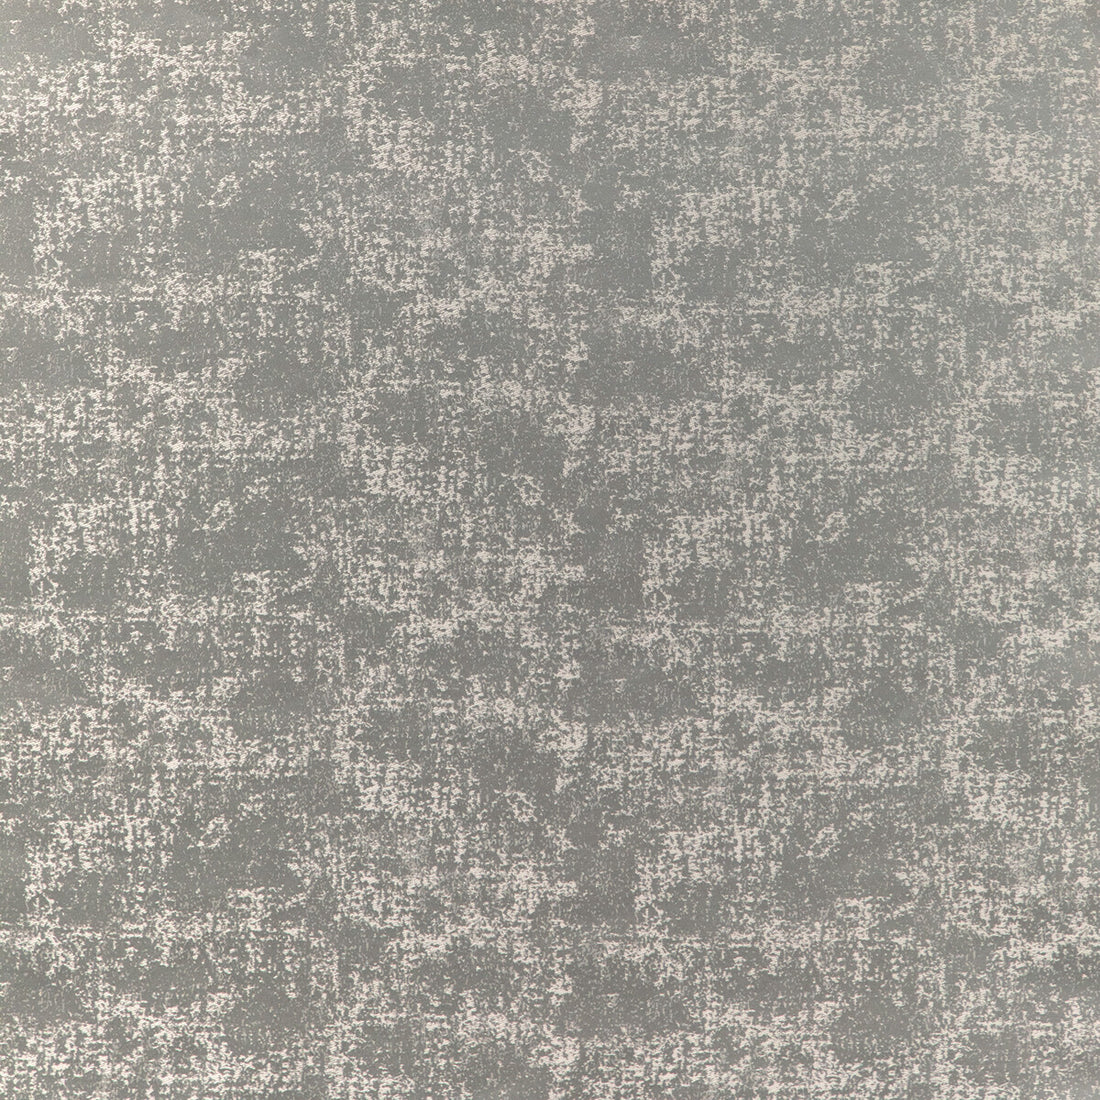 Kravet Contract fabric in 90006-11 color - pattern 90006.11.0 - by Kravet Contract in the Fr Window Blackout Drapery III collection